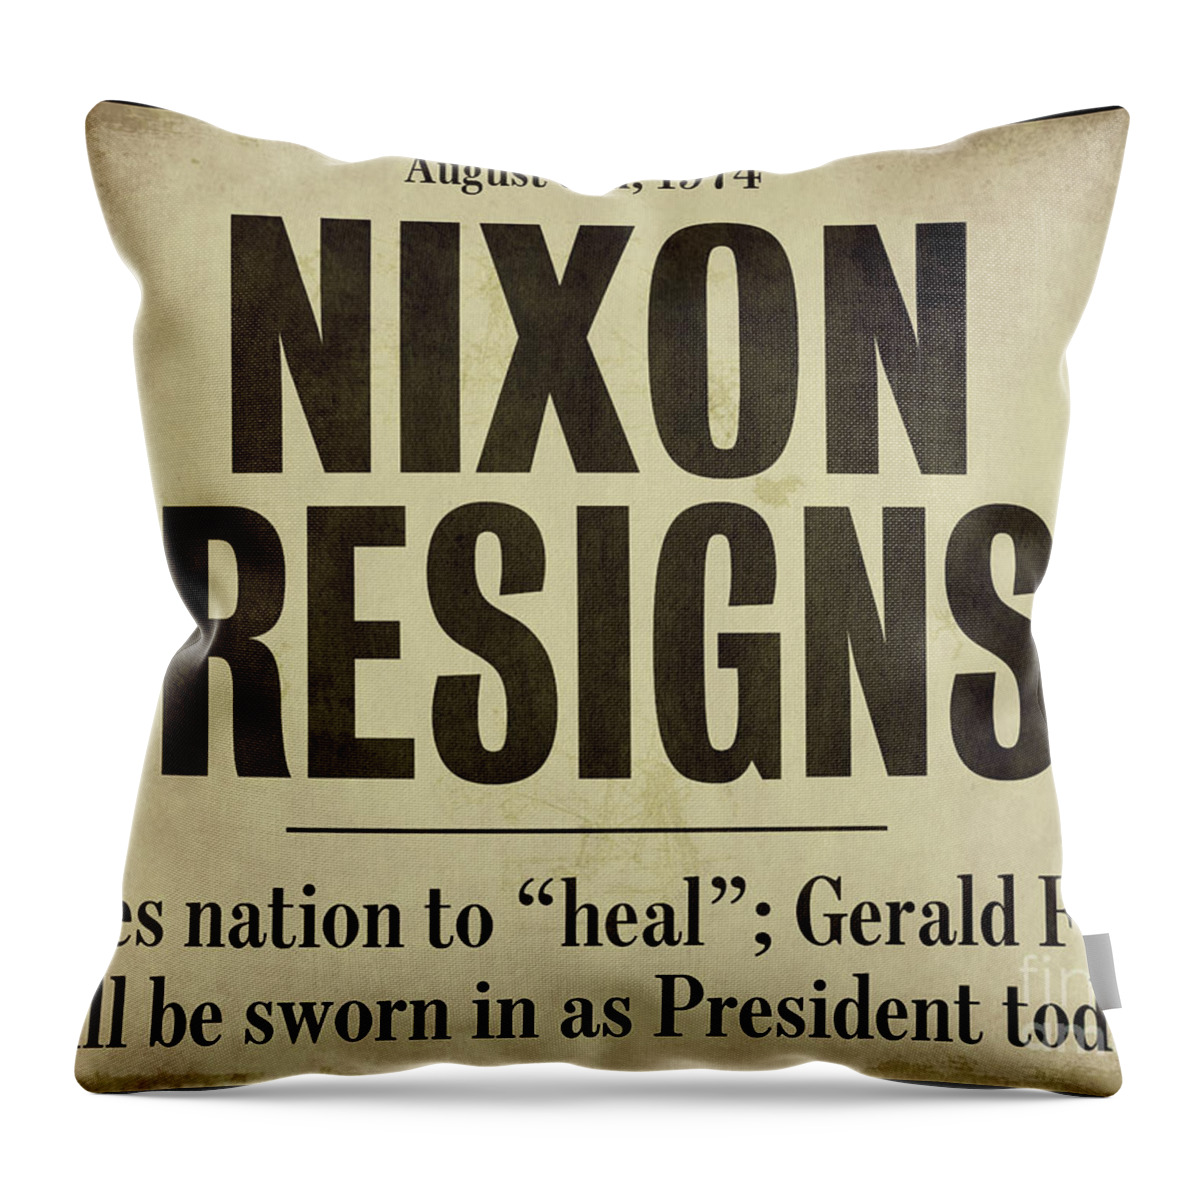 Nixon Resigns Throw Pillow featuring the painting Nixon Resigns Newspaper Headline by Mindy Sommers